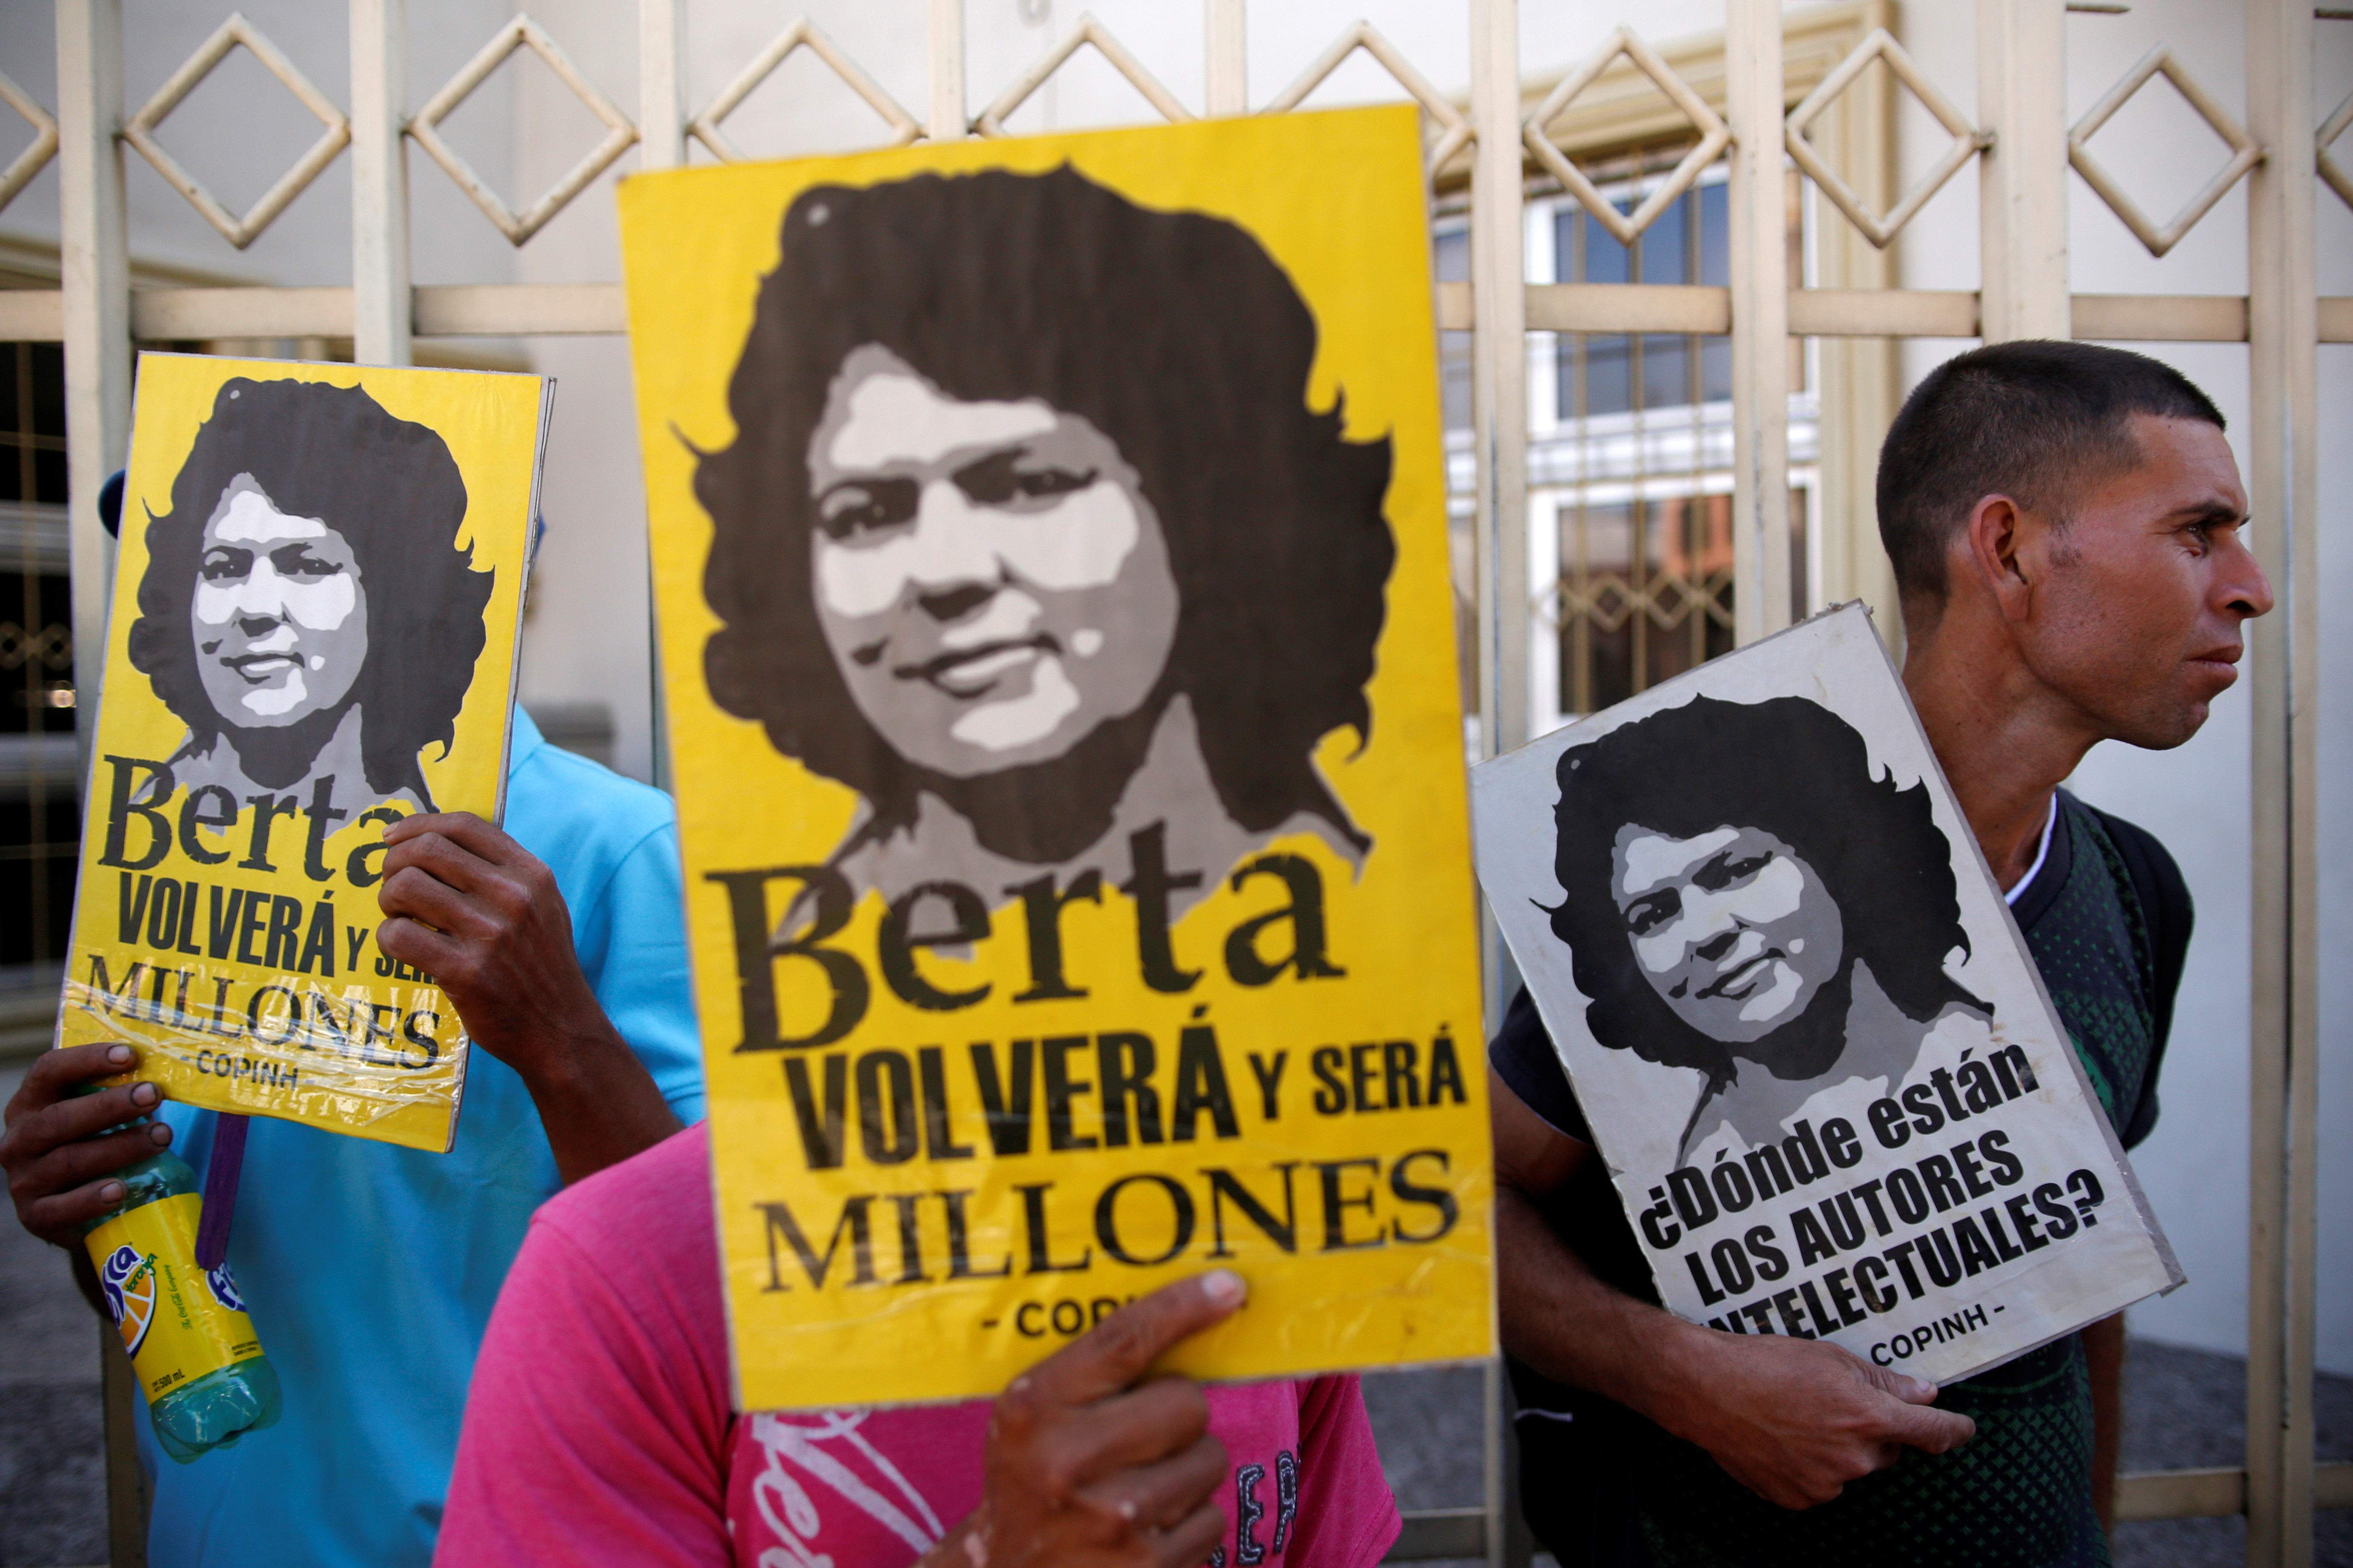 Protesters remember Berta Cáceres, an environmental and indigenous rights campaigner murdered in 2016. 